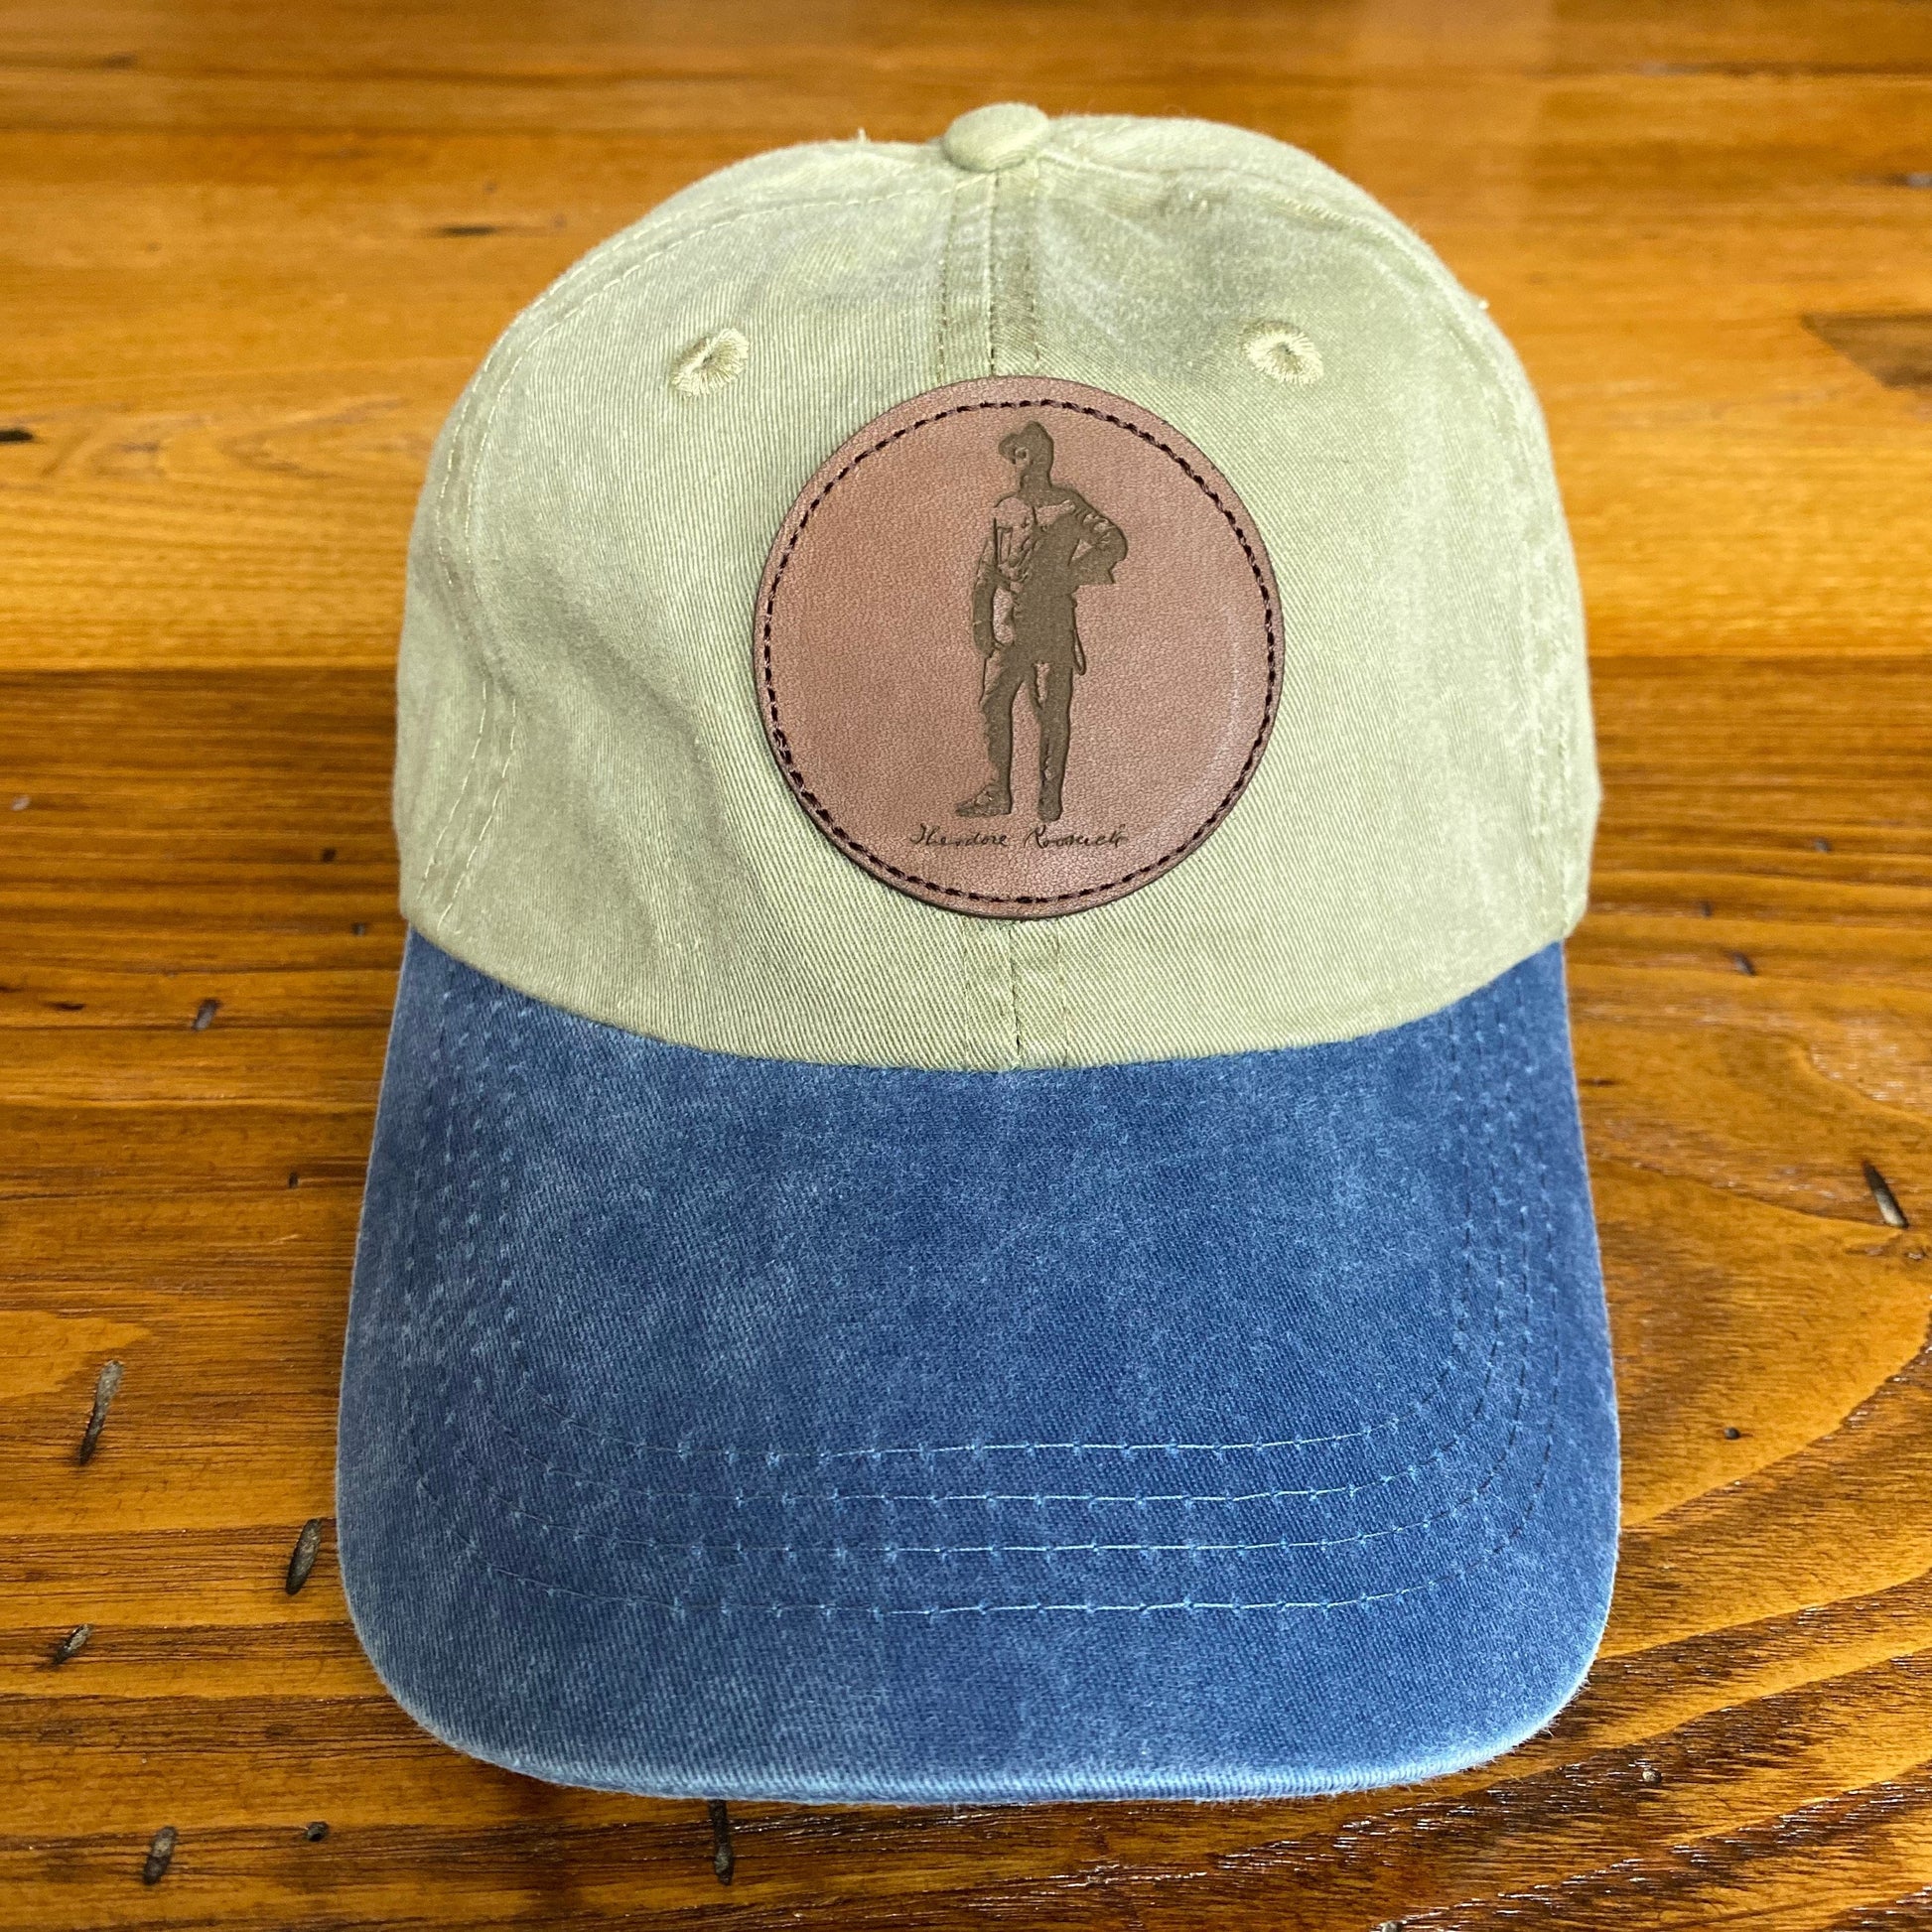 Khaki-Navy Theodore Roosevelt "Signature Series" Leather patch cap from the History List Store